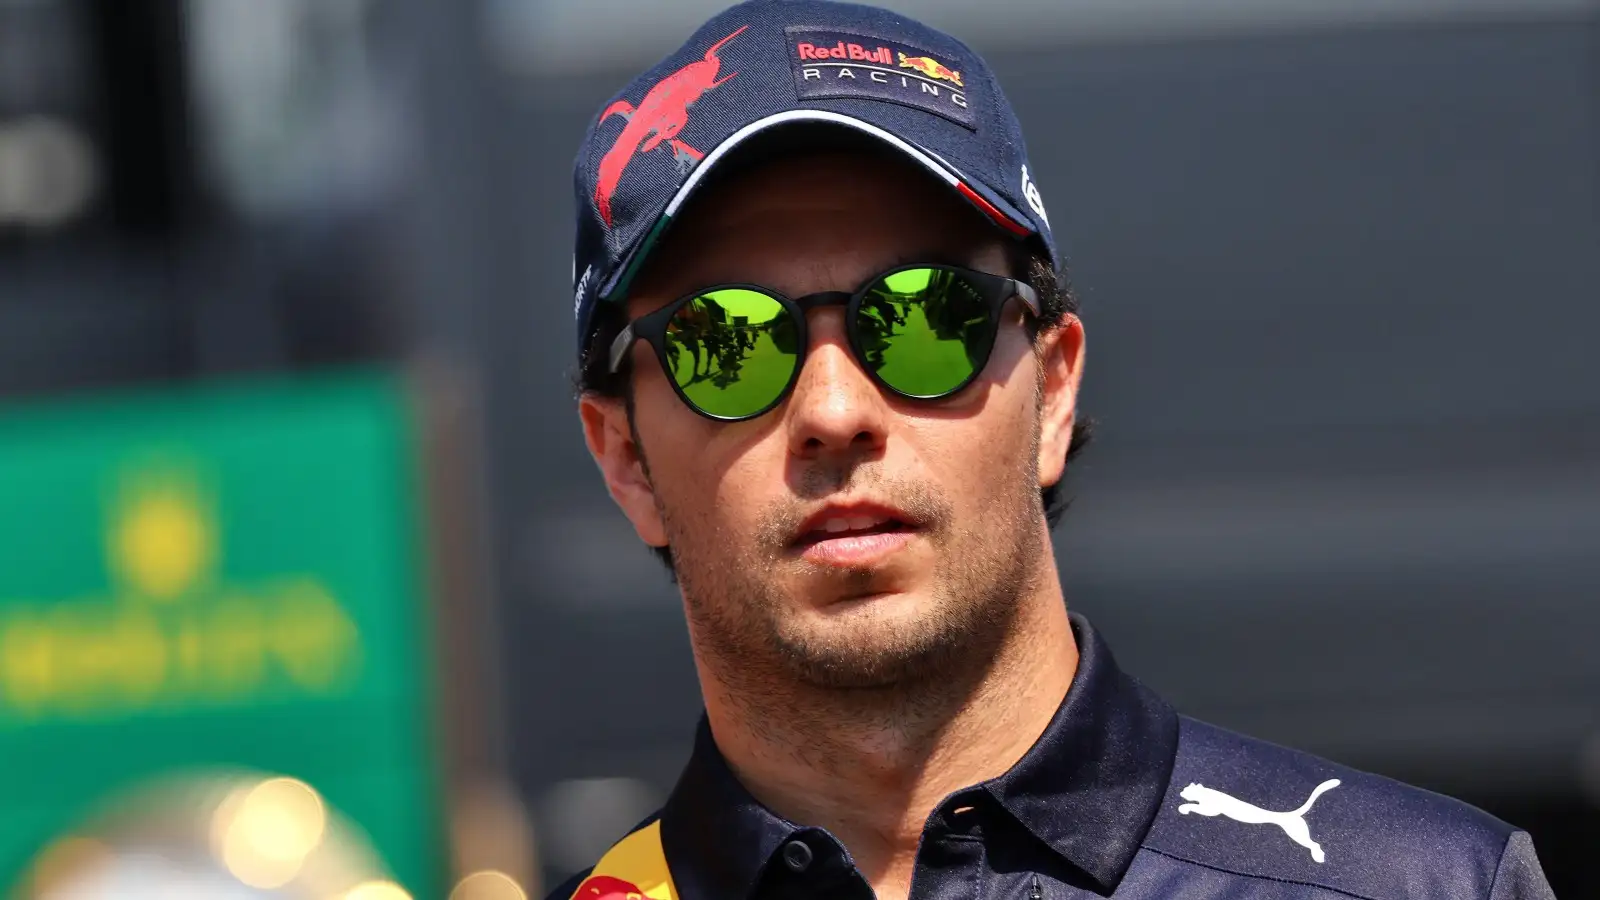 Sergio Perez wears Red Bull gear and sunglasses. France, July 2022.